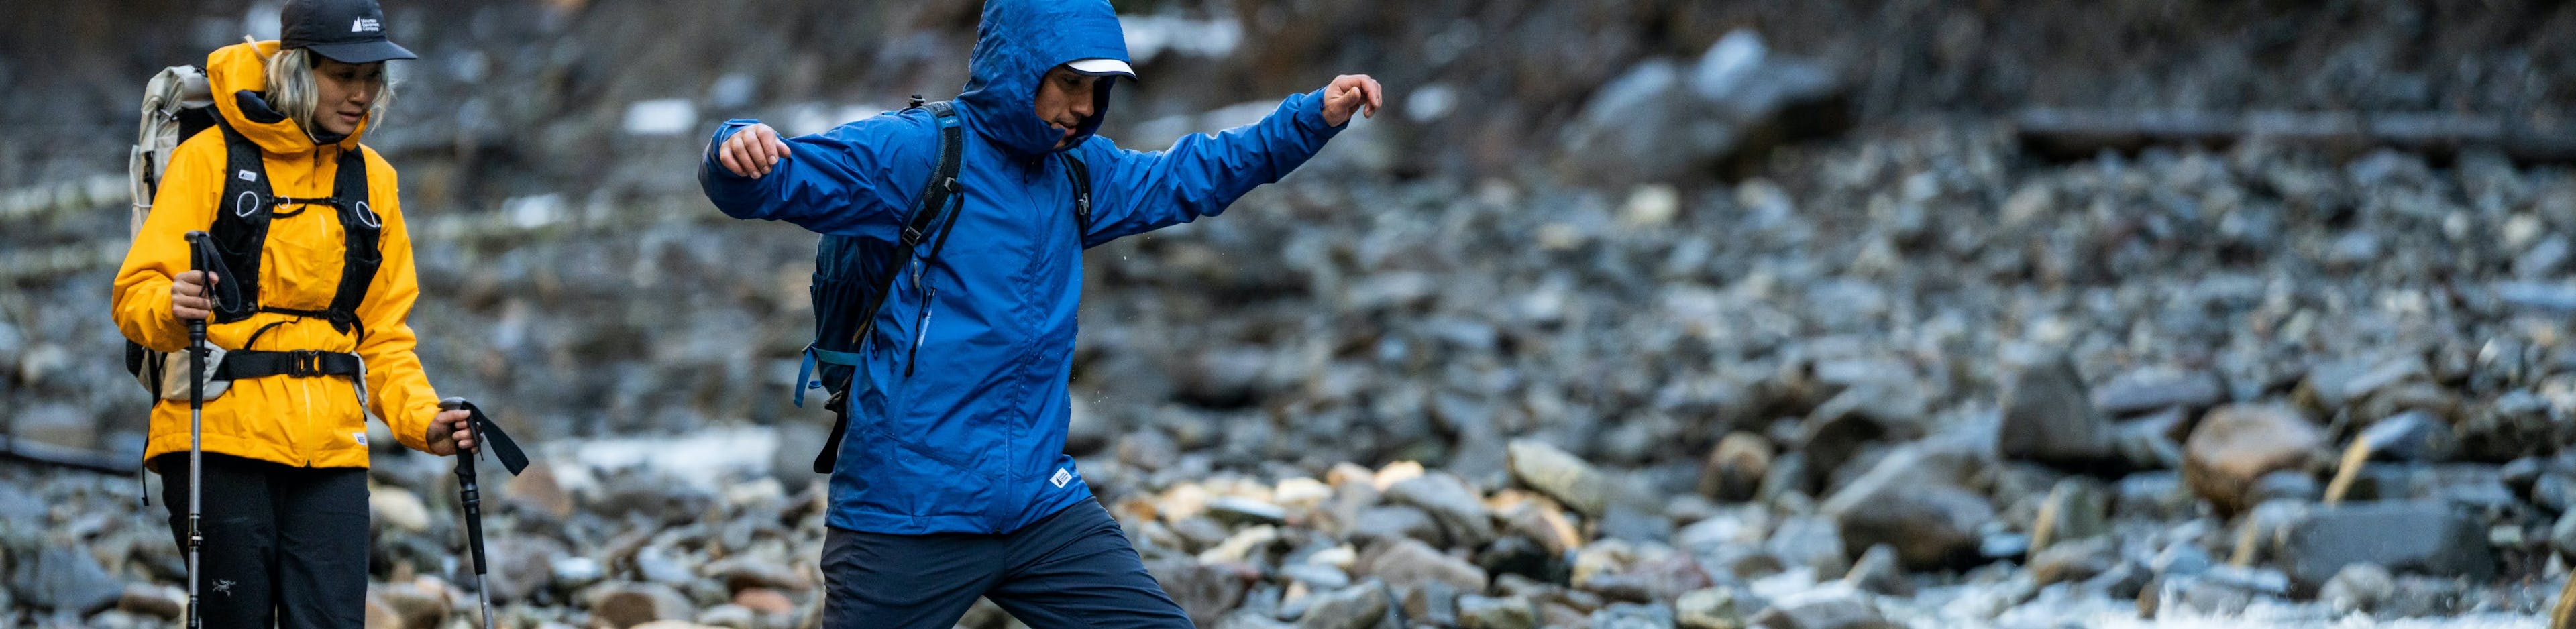 Up-for-anything waterproof-breathable protection for drizzles to downpours. Designed in Vancouver, tested all over. MEC Rainwear Collection